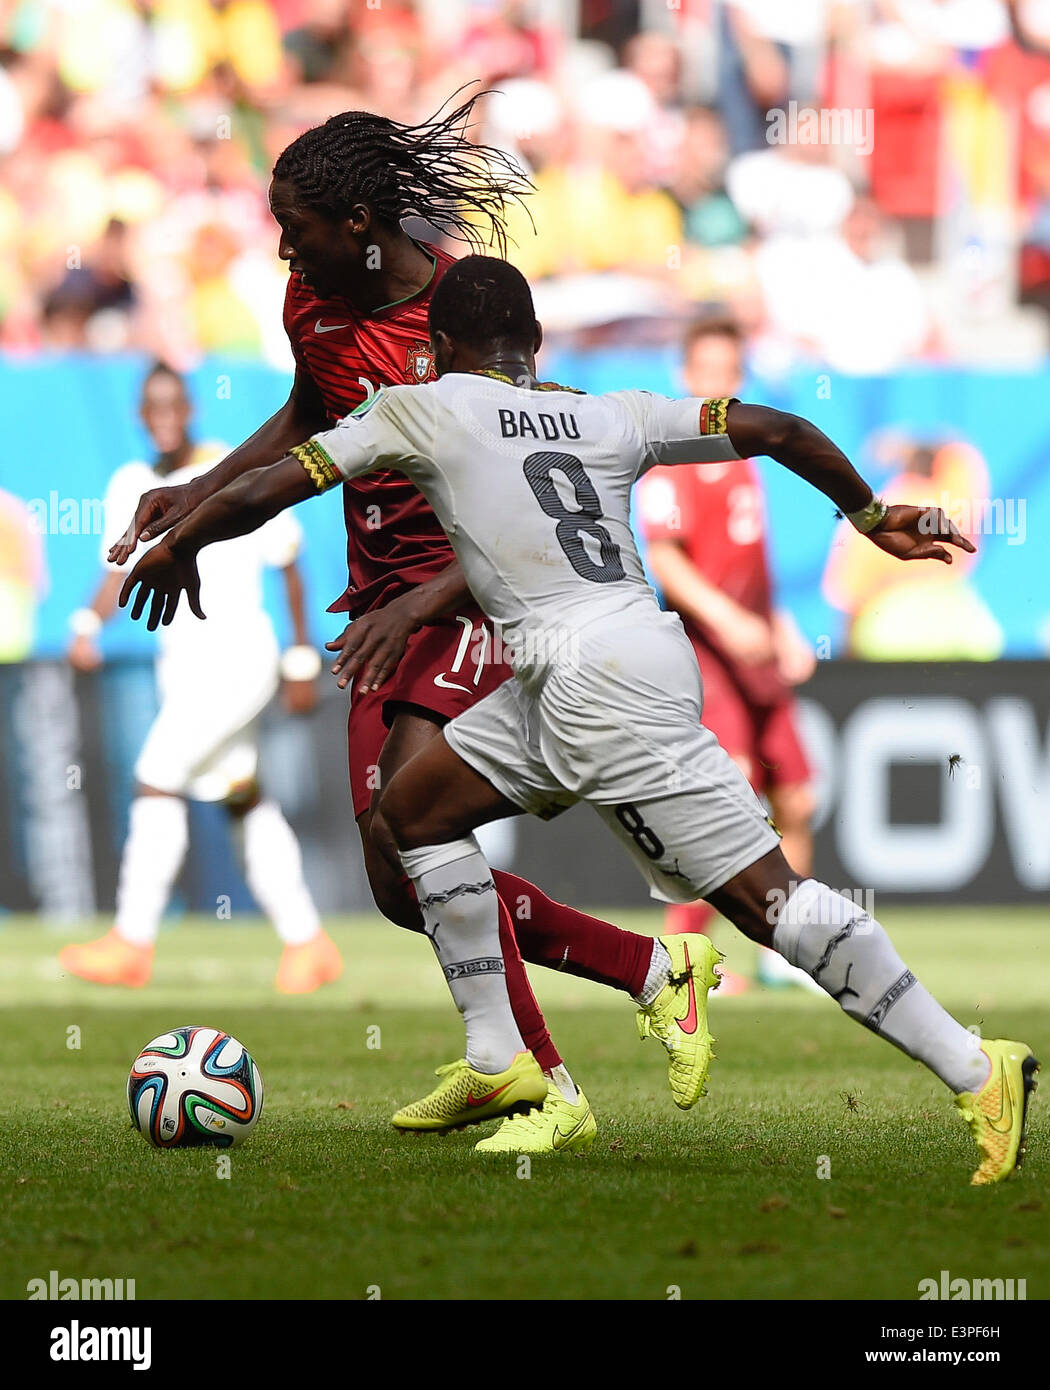 Brasilia, Brazil. 26th June, 2014. Portugal's Eder (L) vies with Ghana's Emmanuel Agyemang-Badu during a Group G match between Portugal and Ghana of 2014 FIFA World Cup at the Estadio Nacional Stadium in Brasilia, Brazil, June 26, 2014. Portugal won 2-1 over Ghana on Thursday. © Qi Heng/Xinhua/Alamy Live News Stock Photo